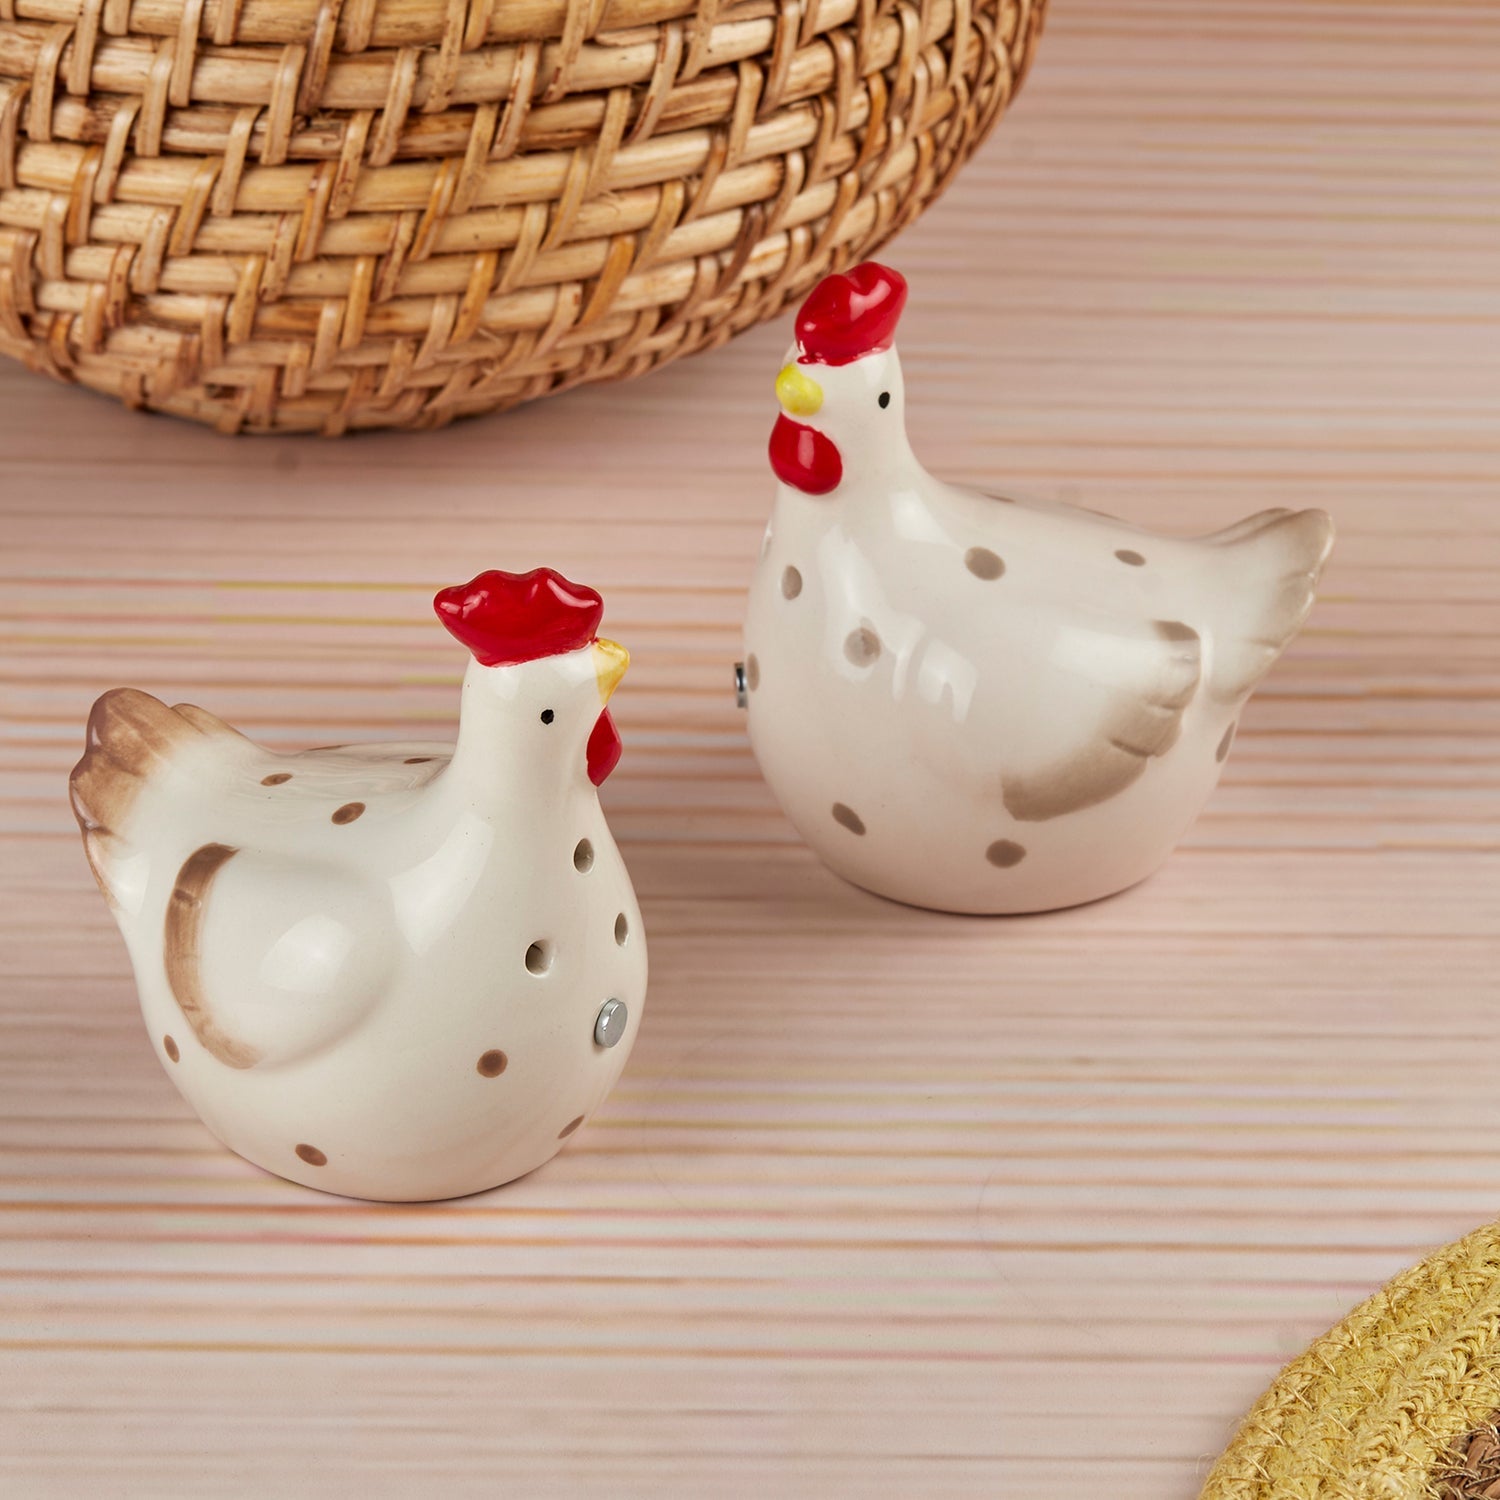 Ceramic Salt and Pepper Shakers Set with tray for Dining Table (10701)